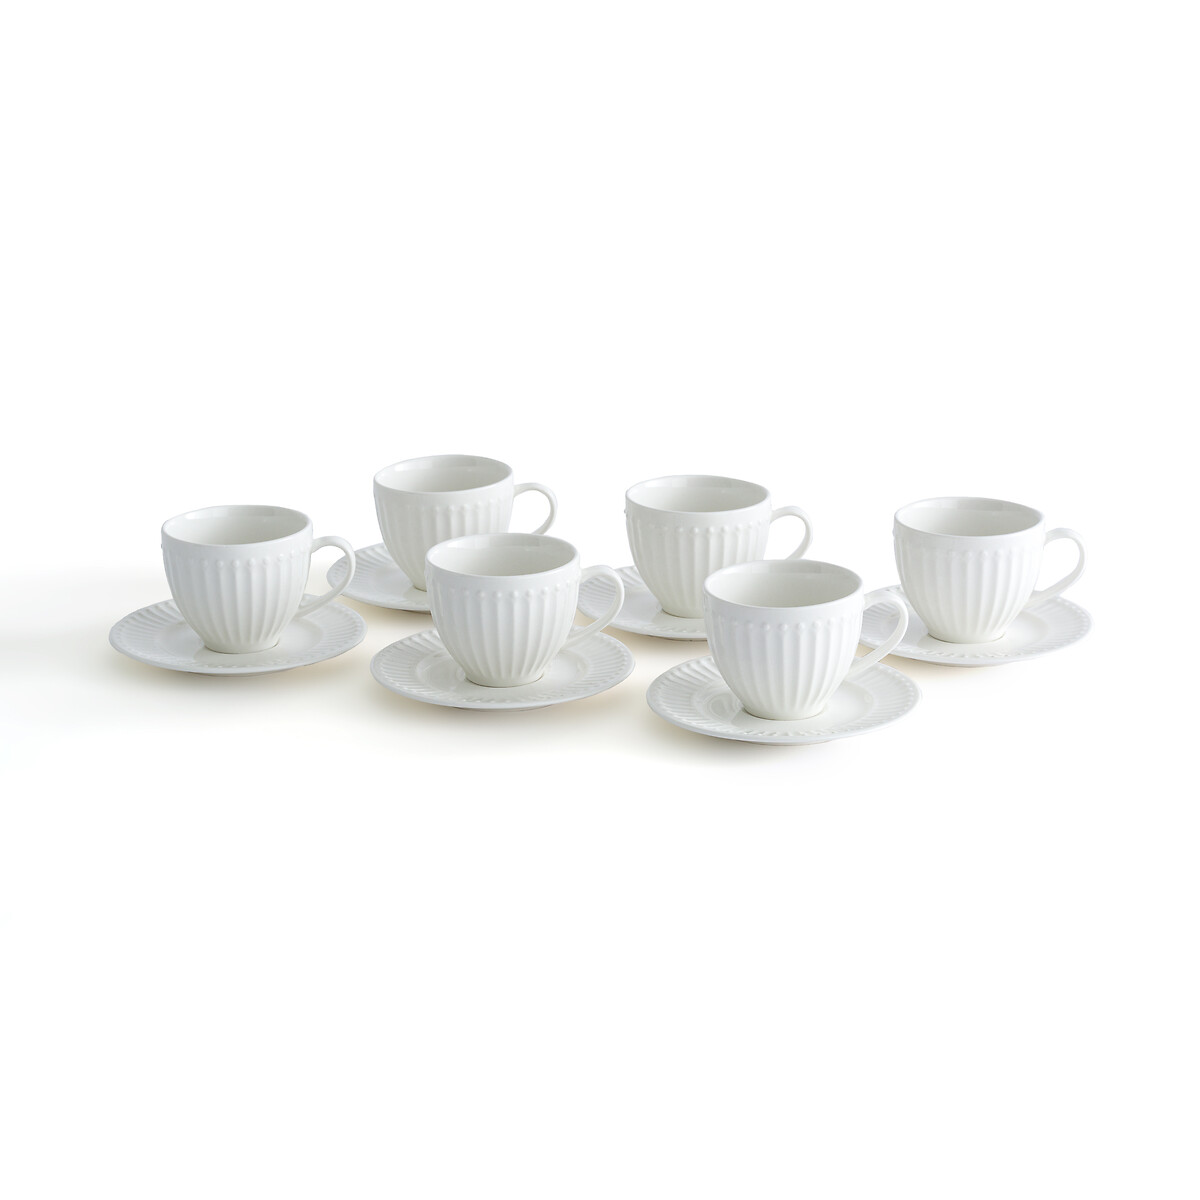 Set of 6 Jewely Porcelain Coffee Cups and Saucers